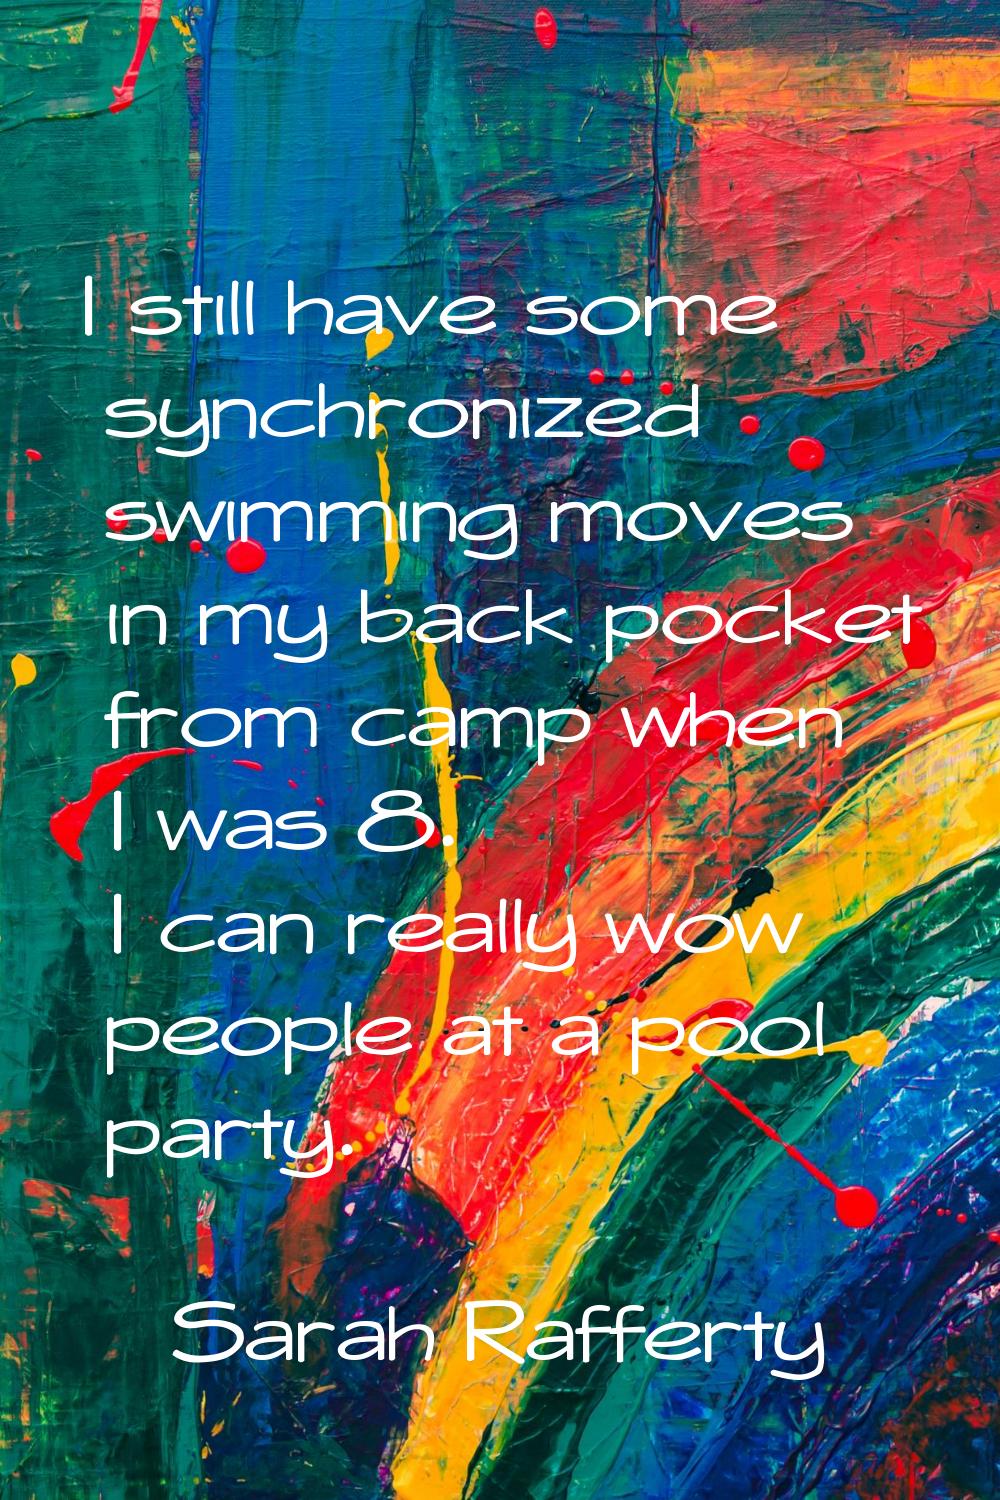 I still have some synchronized swimming moves in my back pocket from camp when I was 8. I can reall